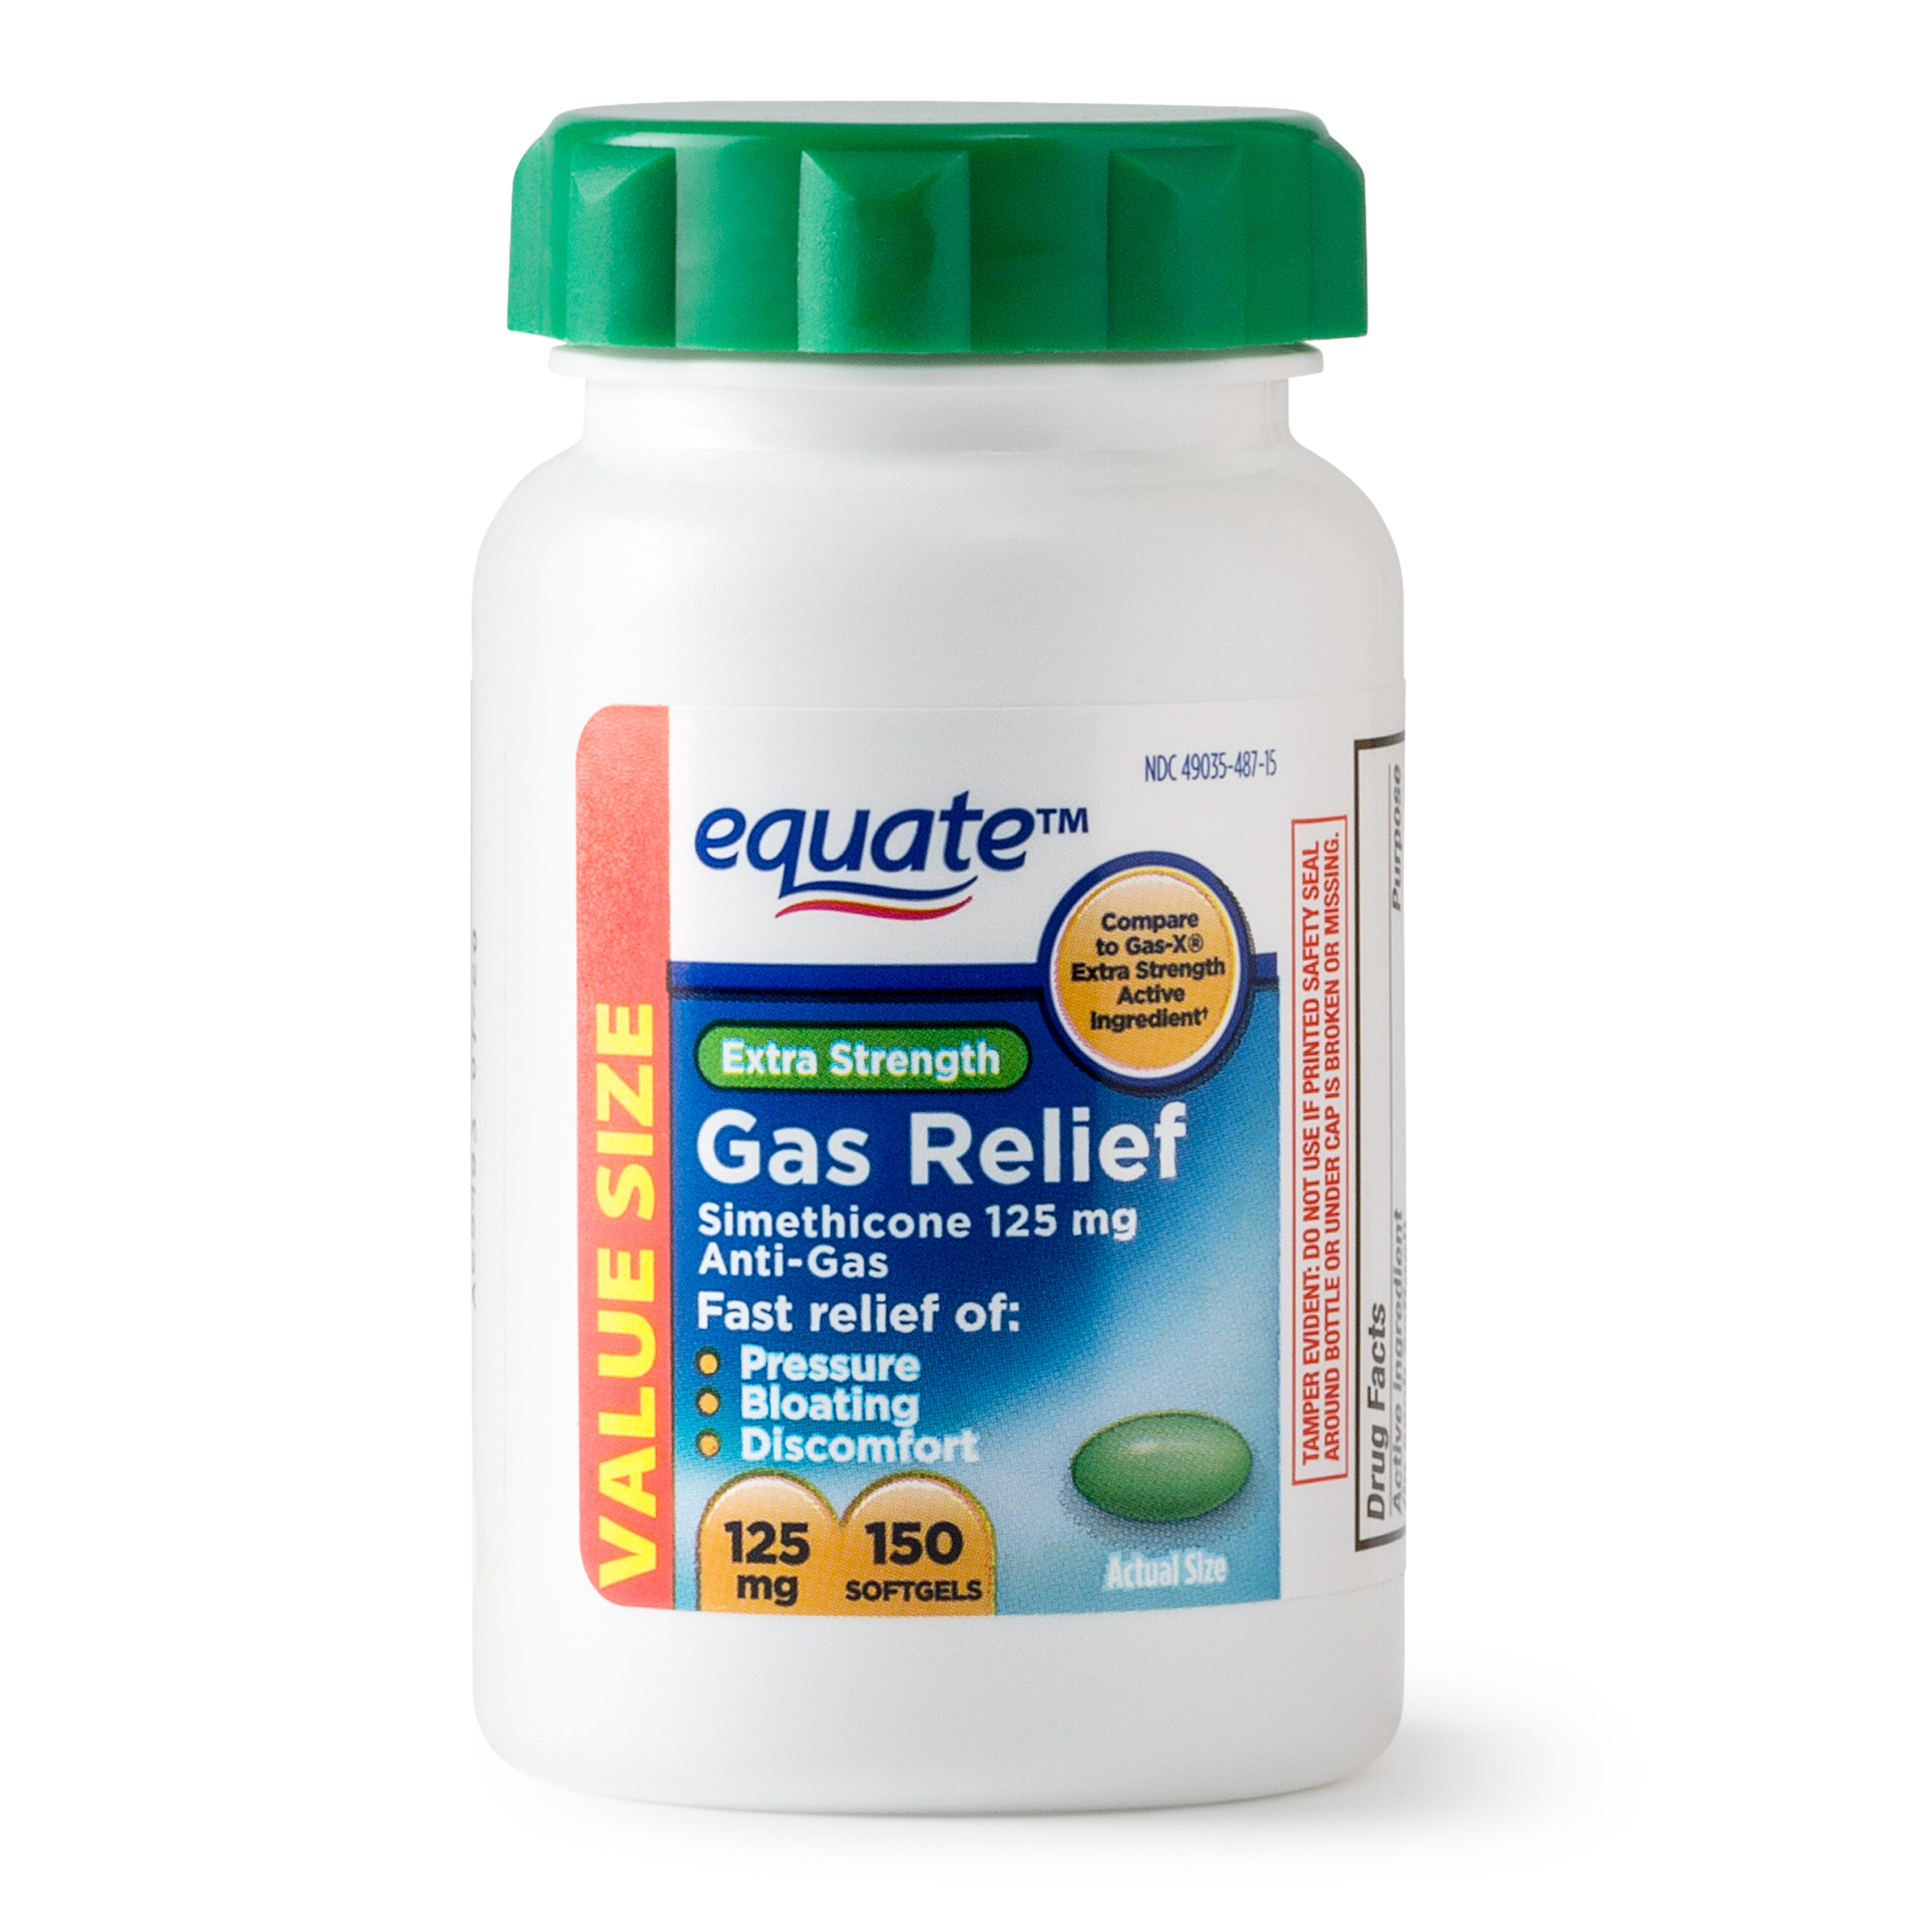 Equate Extra Strength Gas Relief Softgels Value Size, 125 mg, 150 Count - image 1 of 7